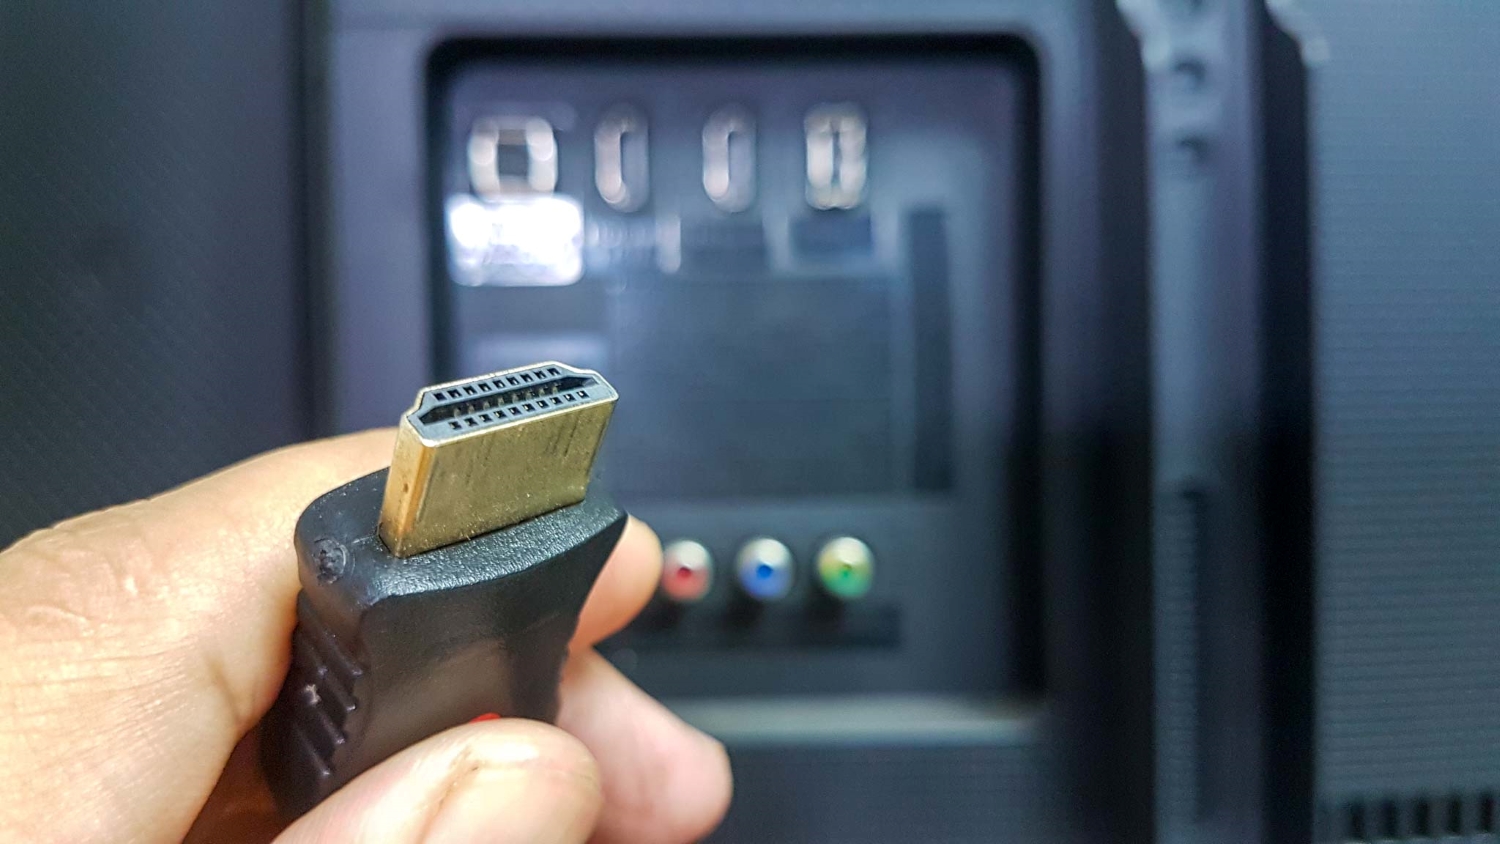 hdmi port to tv connection